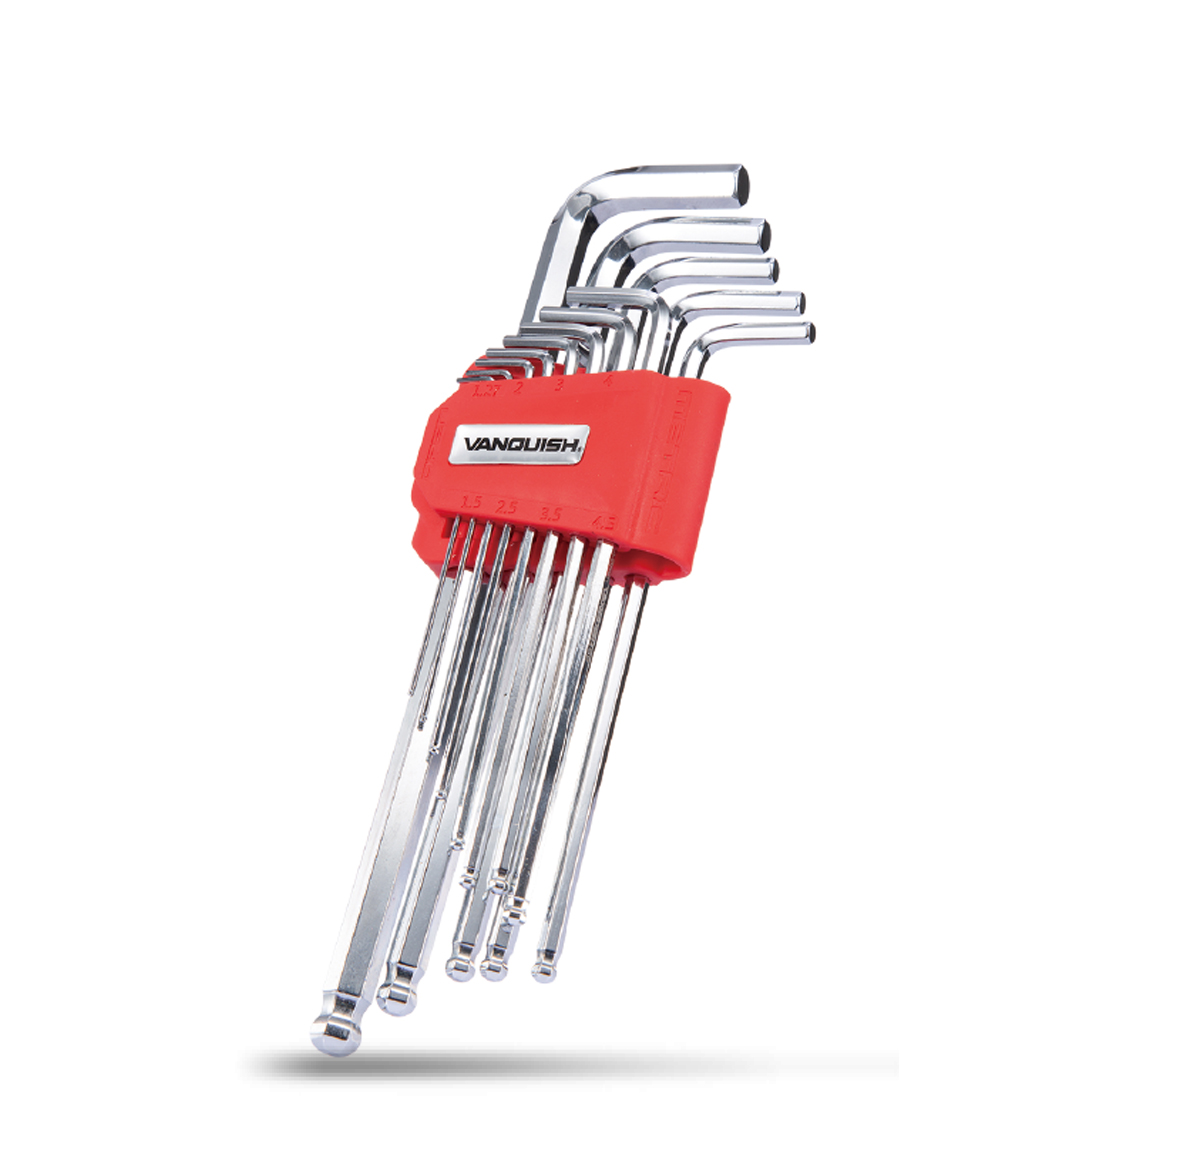 13-PIECE BALL END HEX KEY WRENCH SET